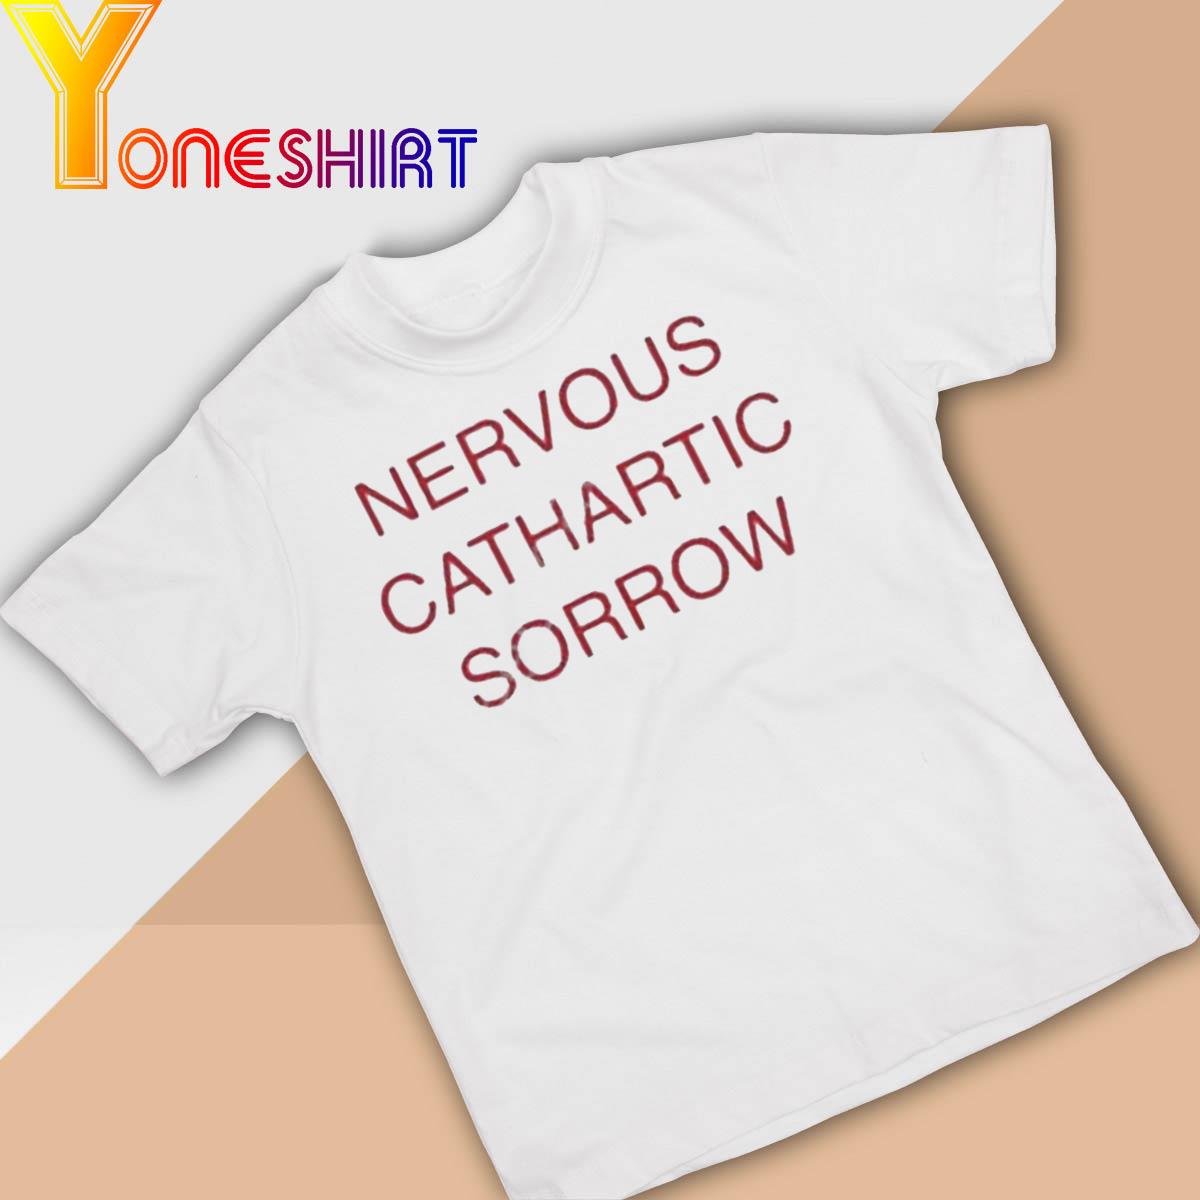 Official Nervous Cathartic Sorrow Shirt